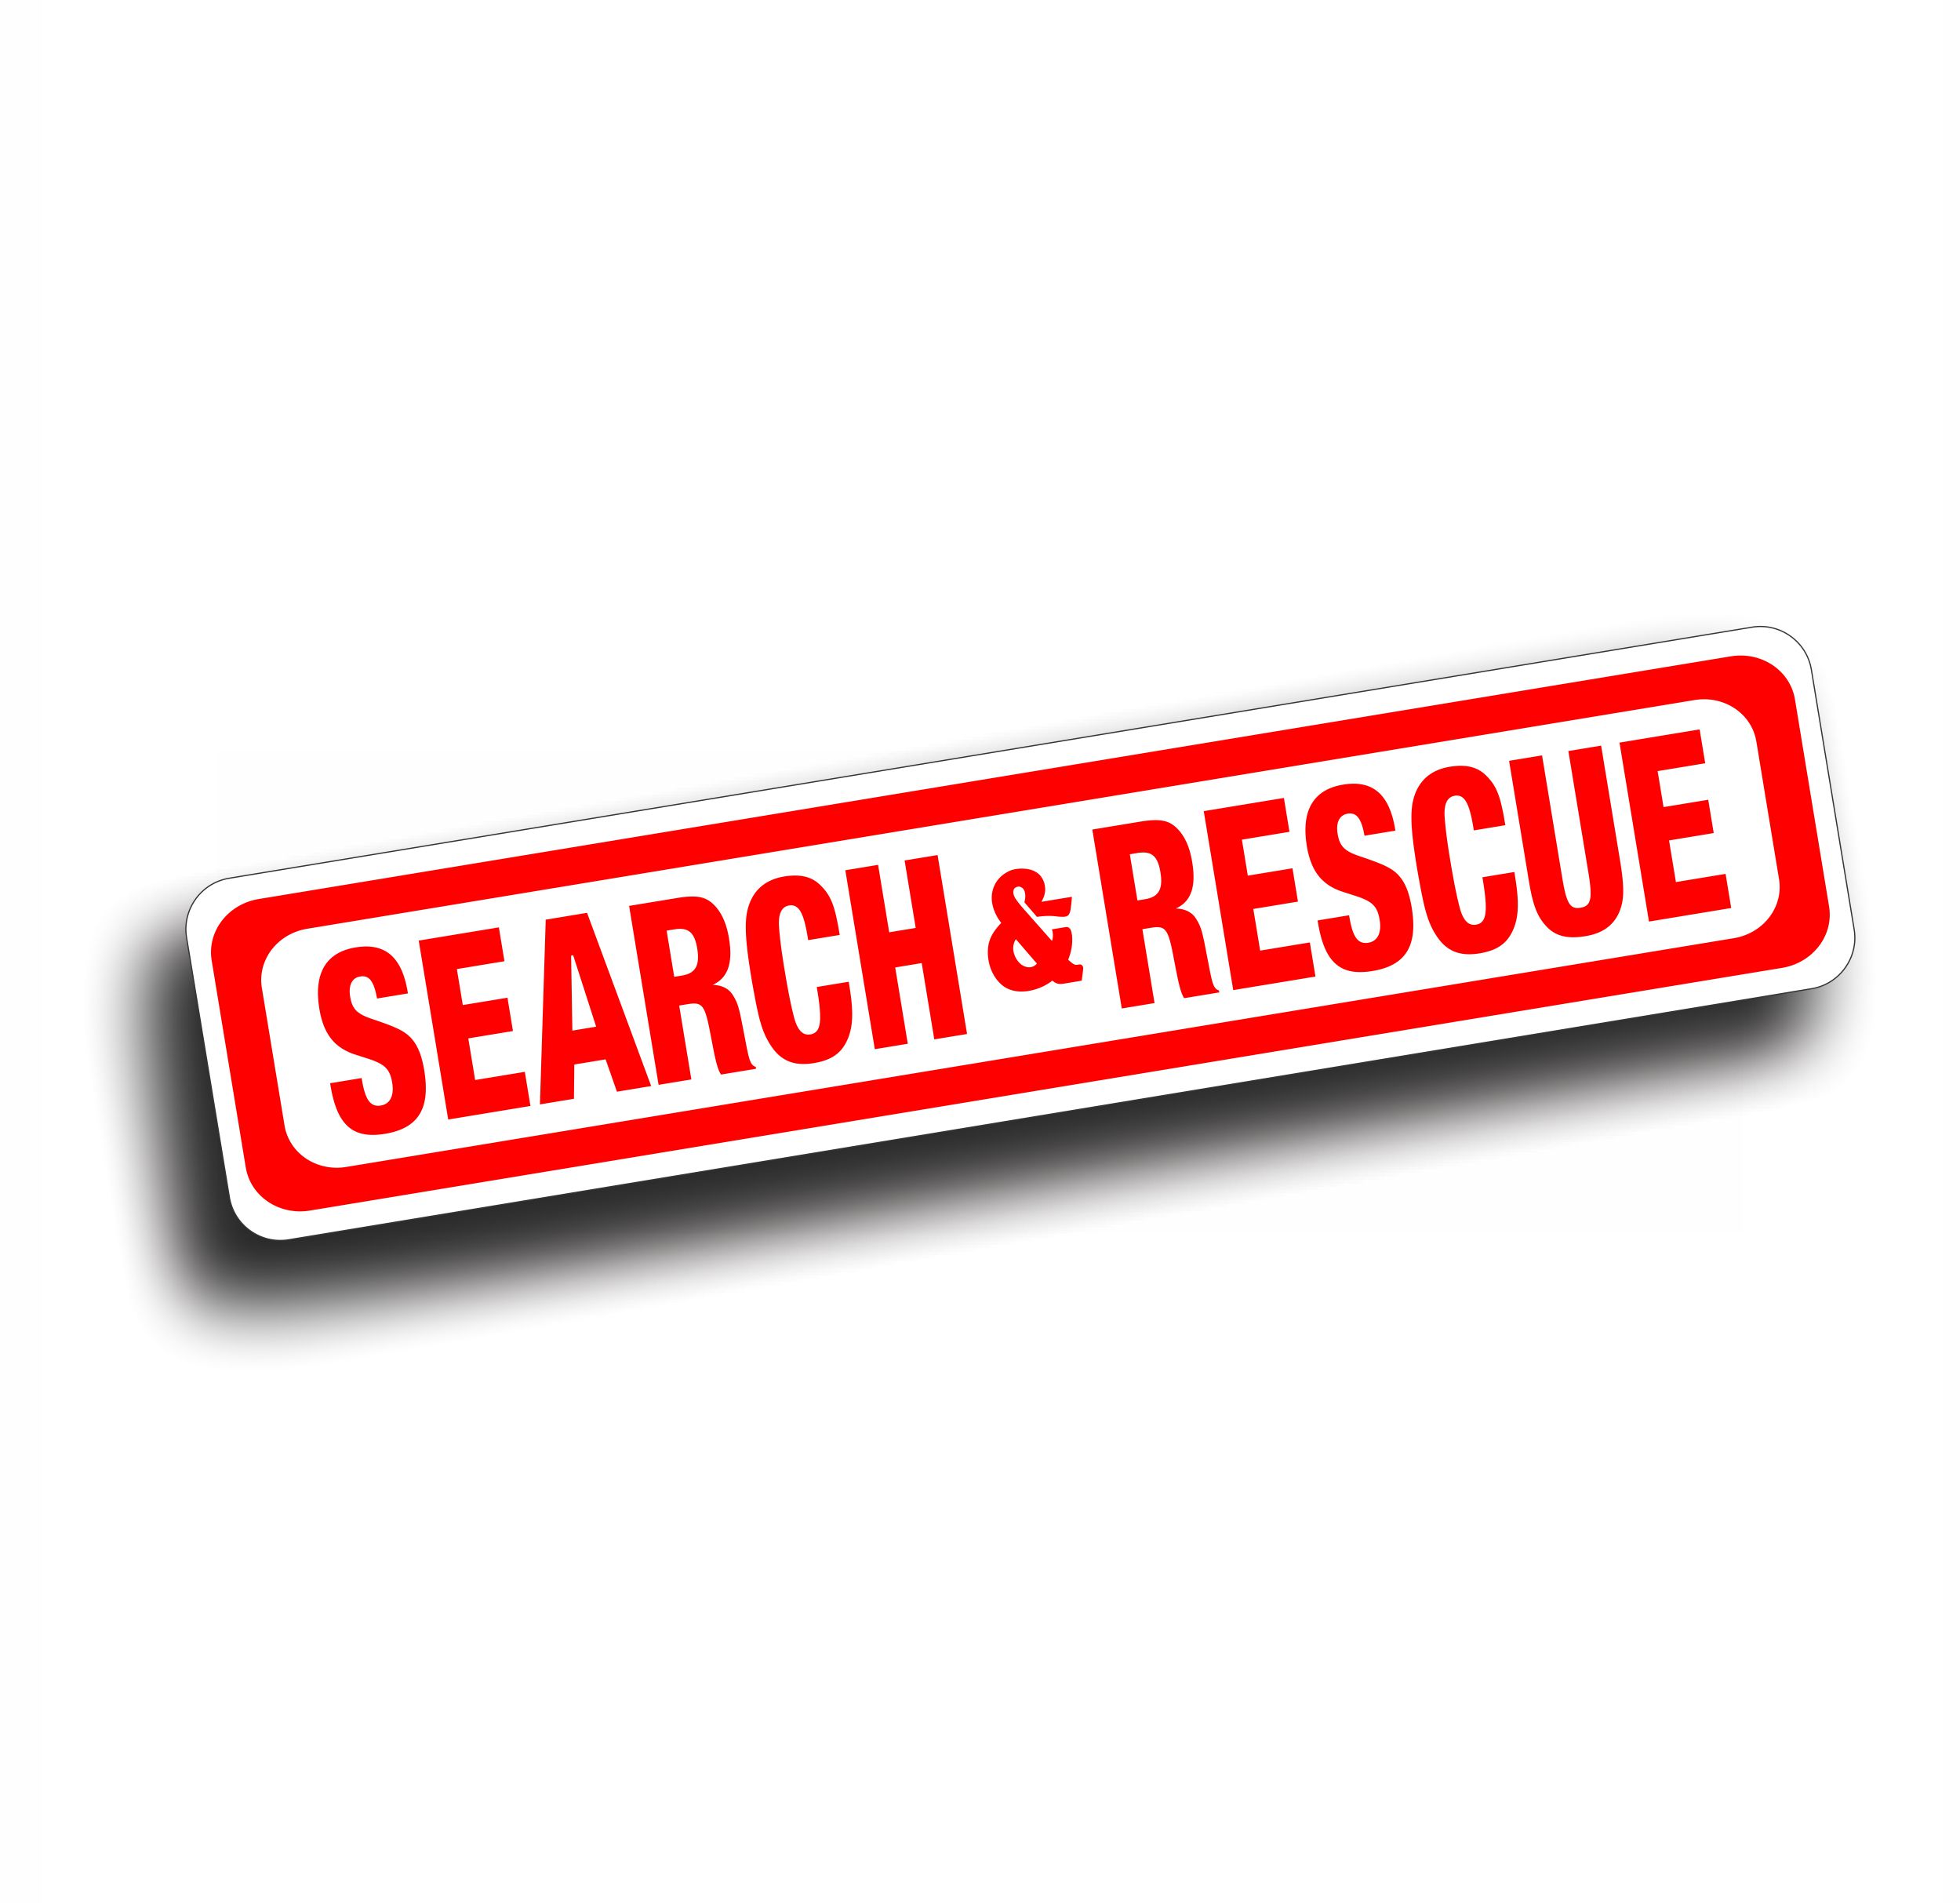 LOWLAND RESCUE Magnet 4x4 Response Car Door Magnets Search & Rescue 300mm x 2 